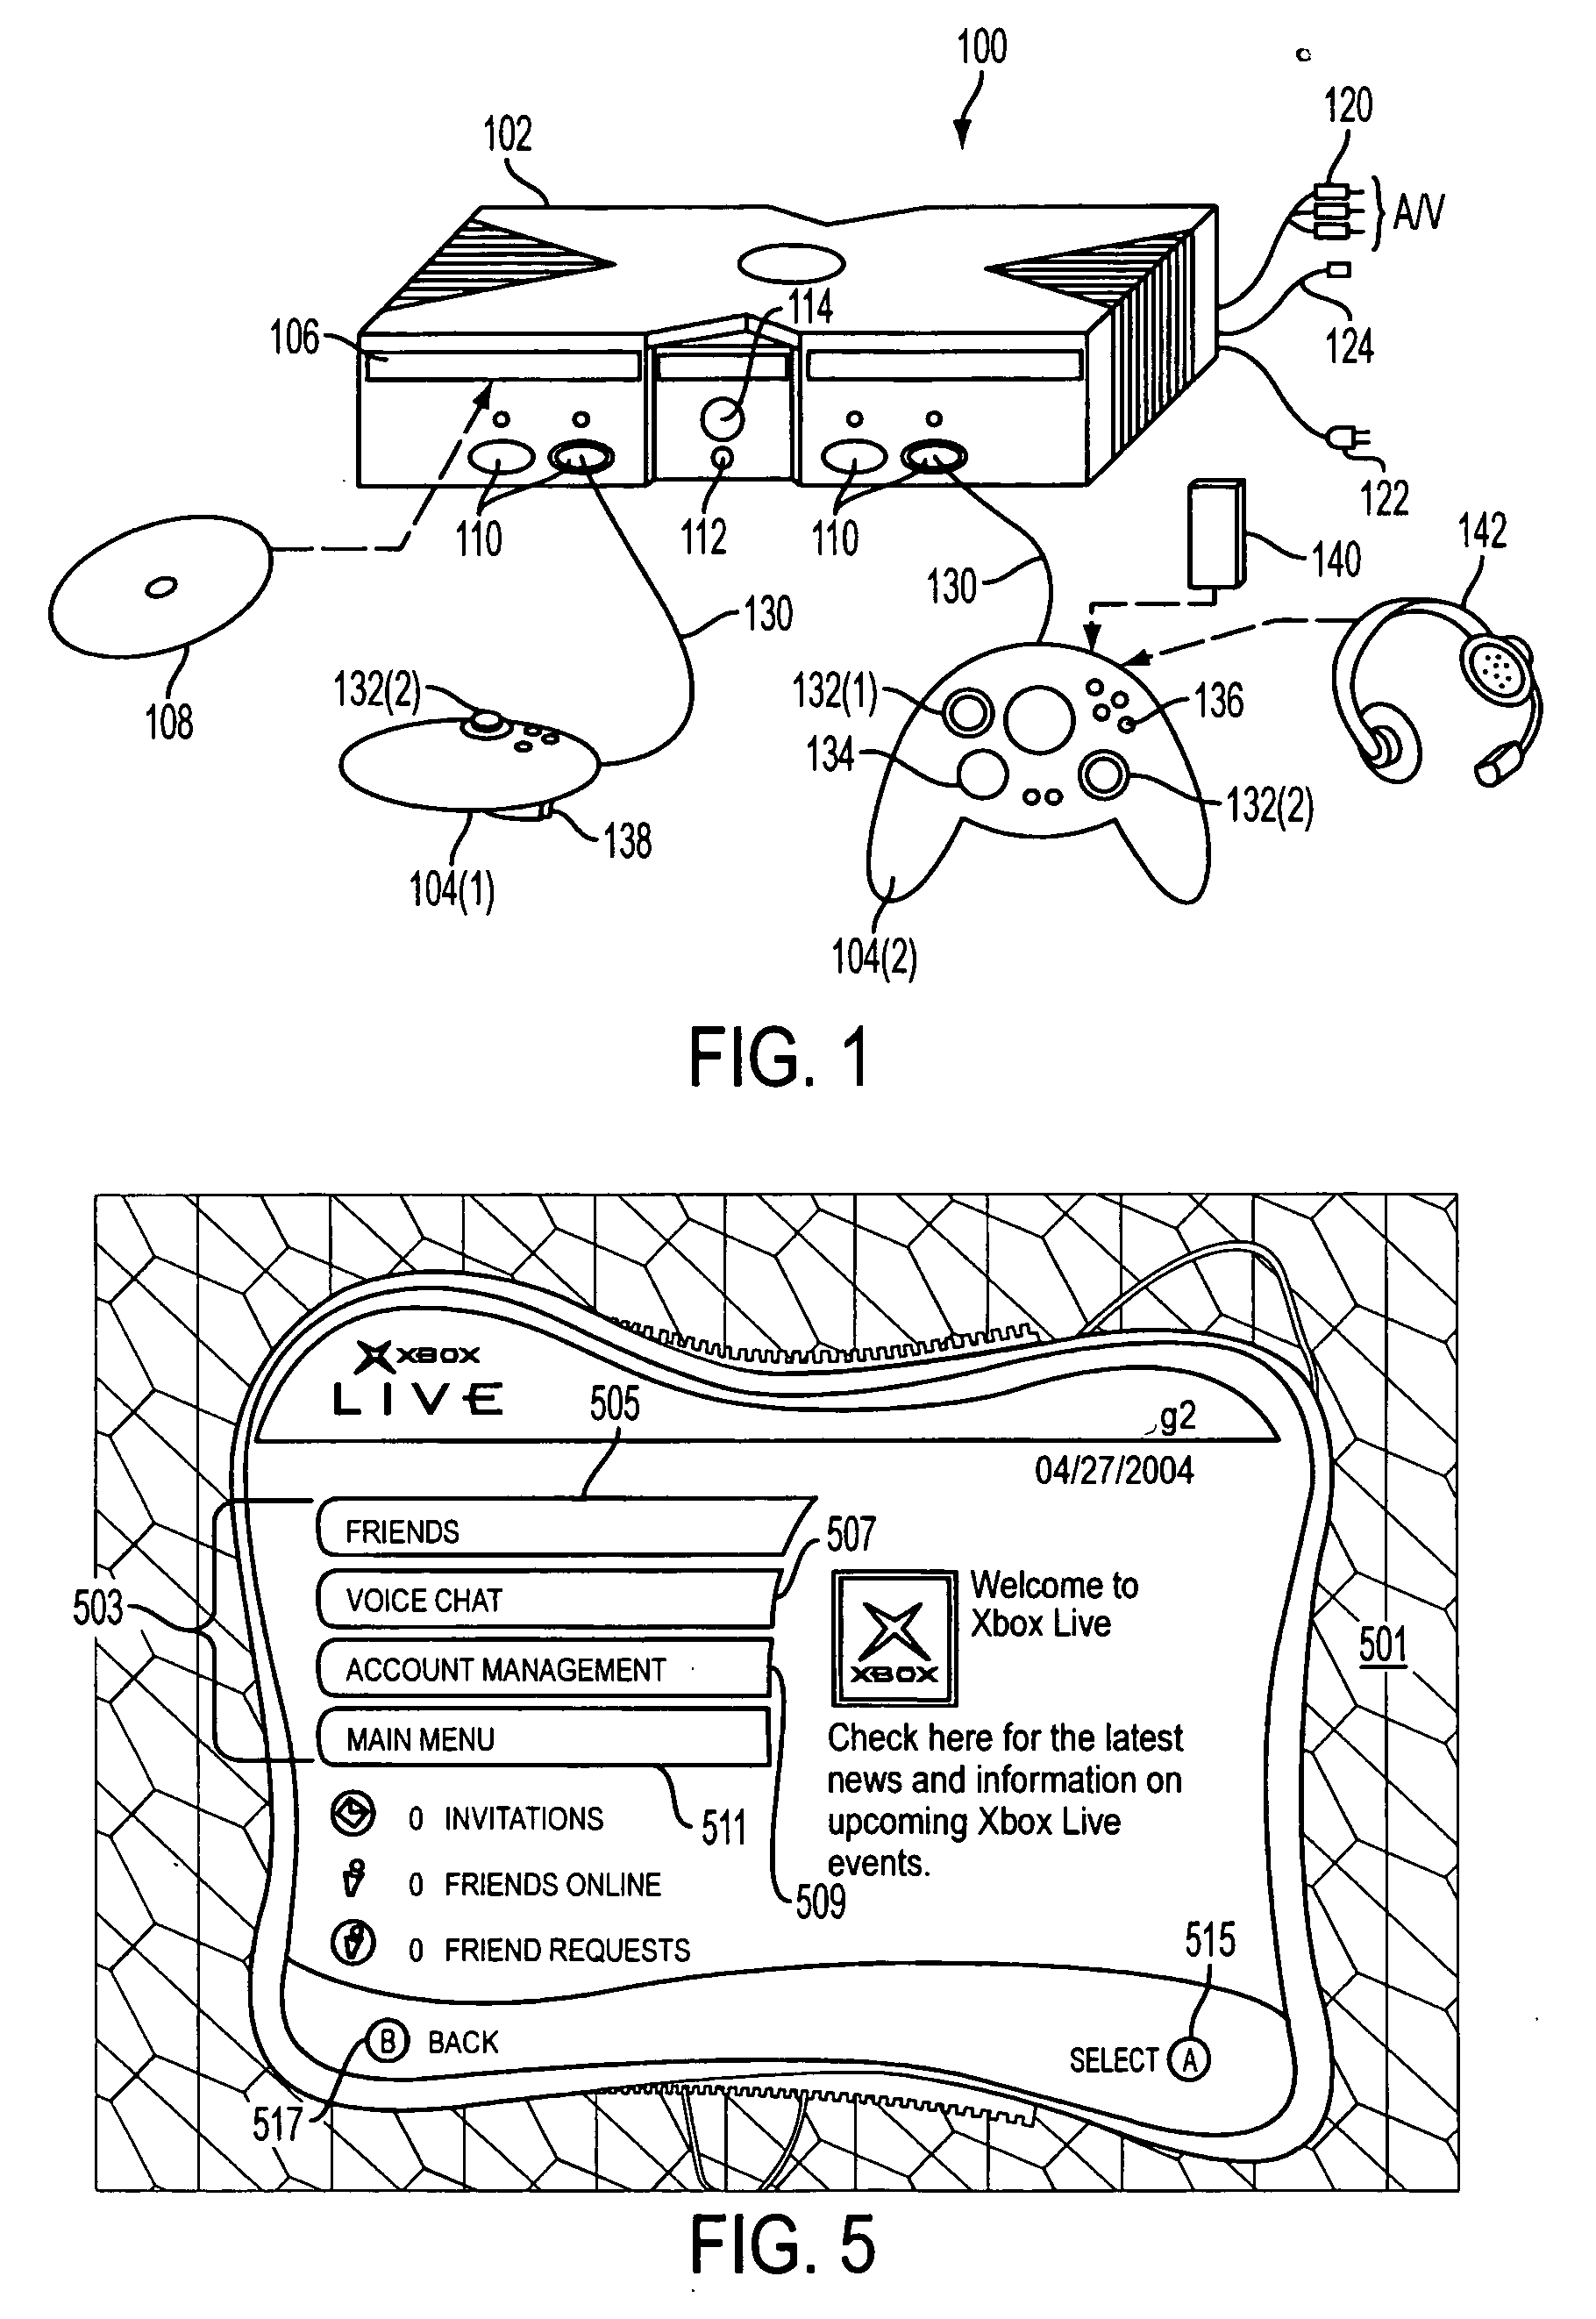 User interface for multi-sensory emoticons in a communication system